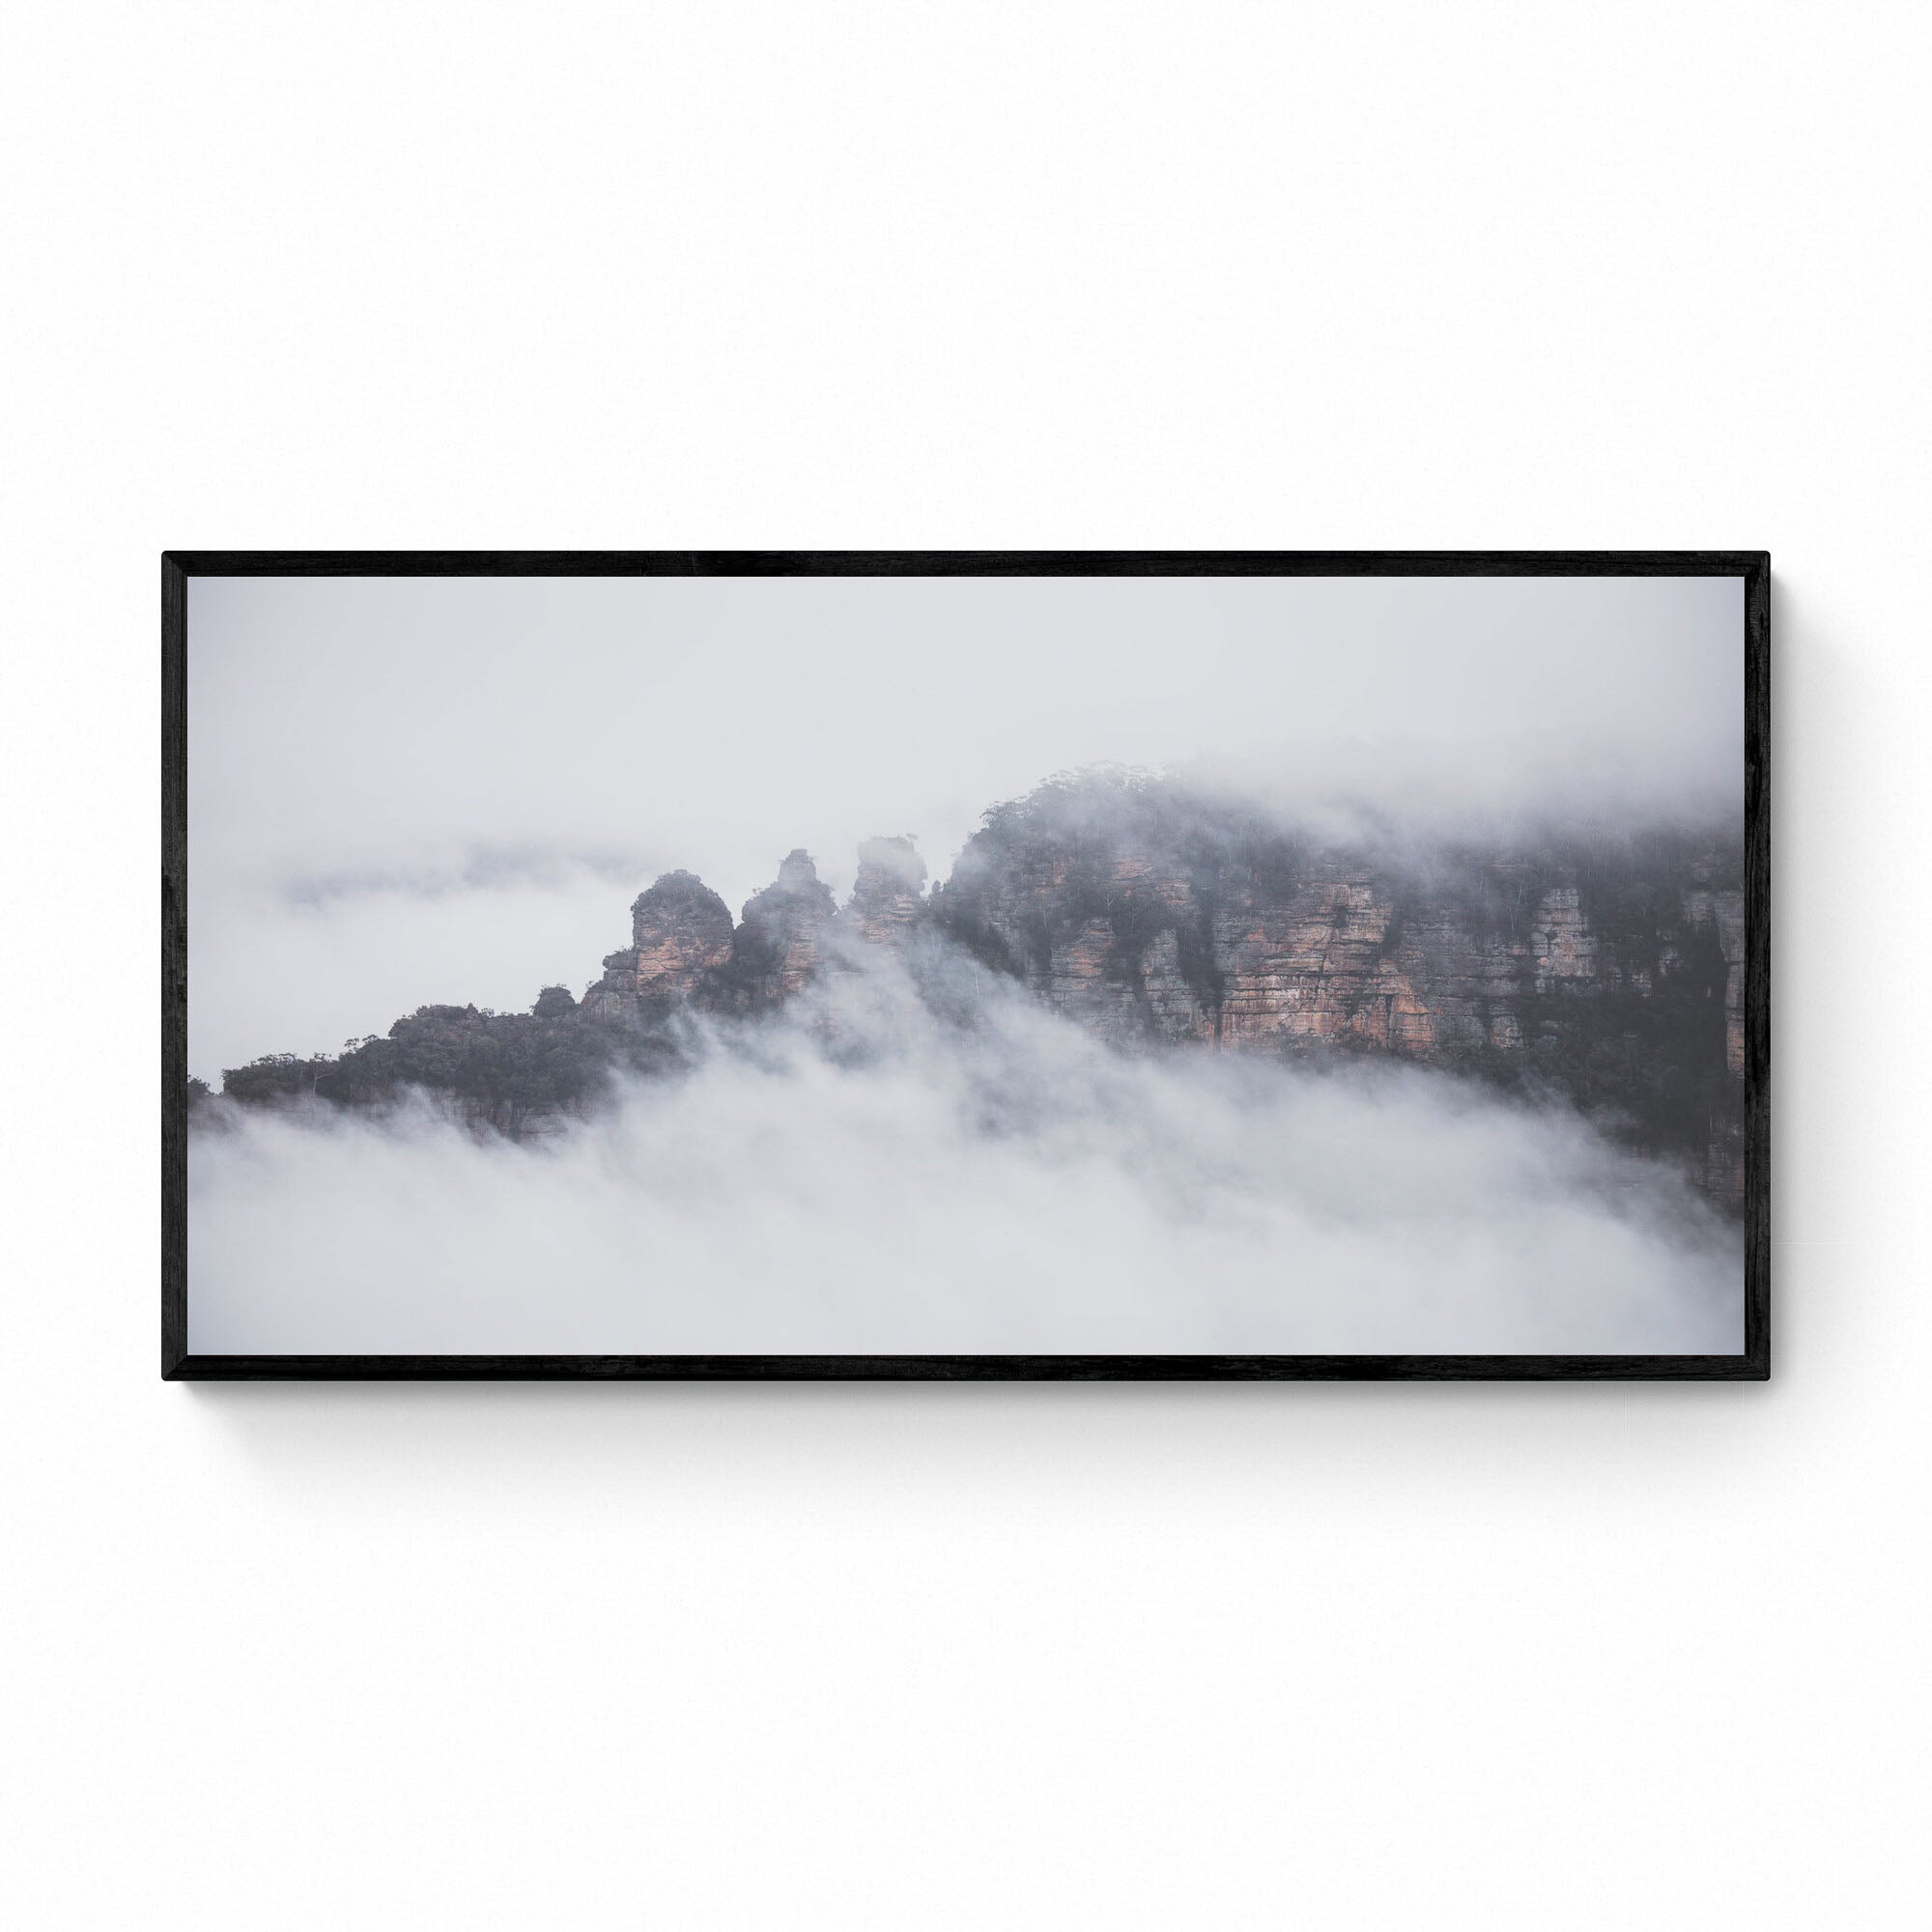 The Three Sisters rock formation in Sydney, Australia, is enshrouded in mist, as viewed from Sublime Point.